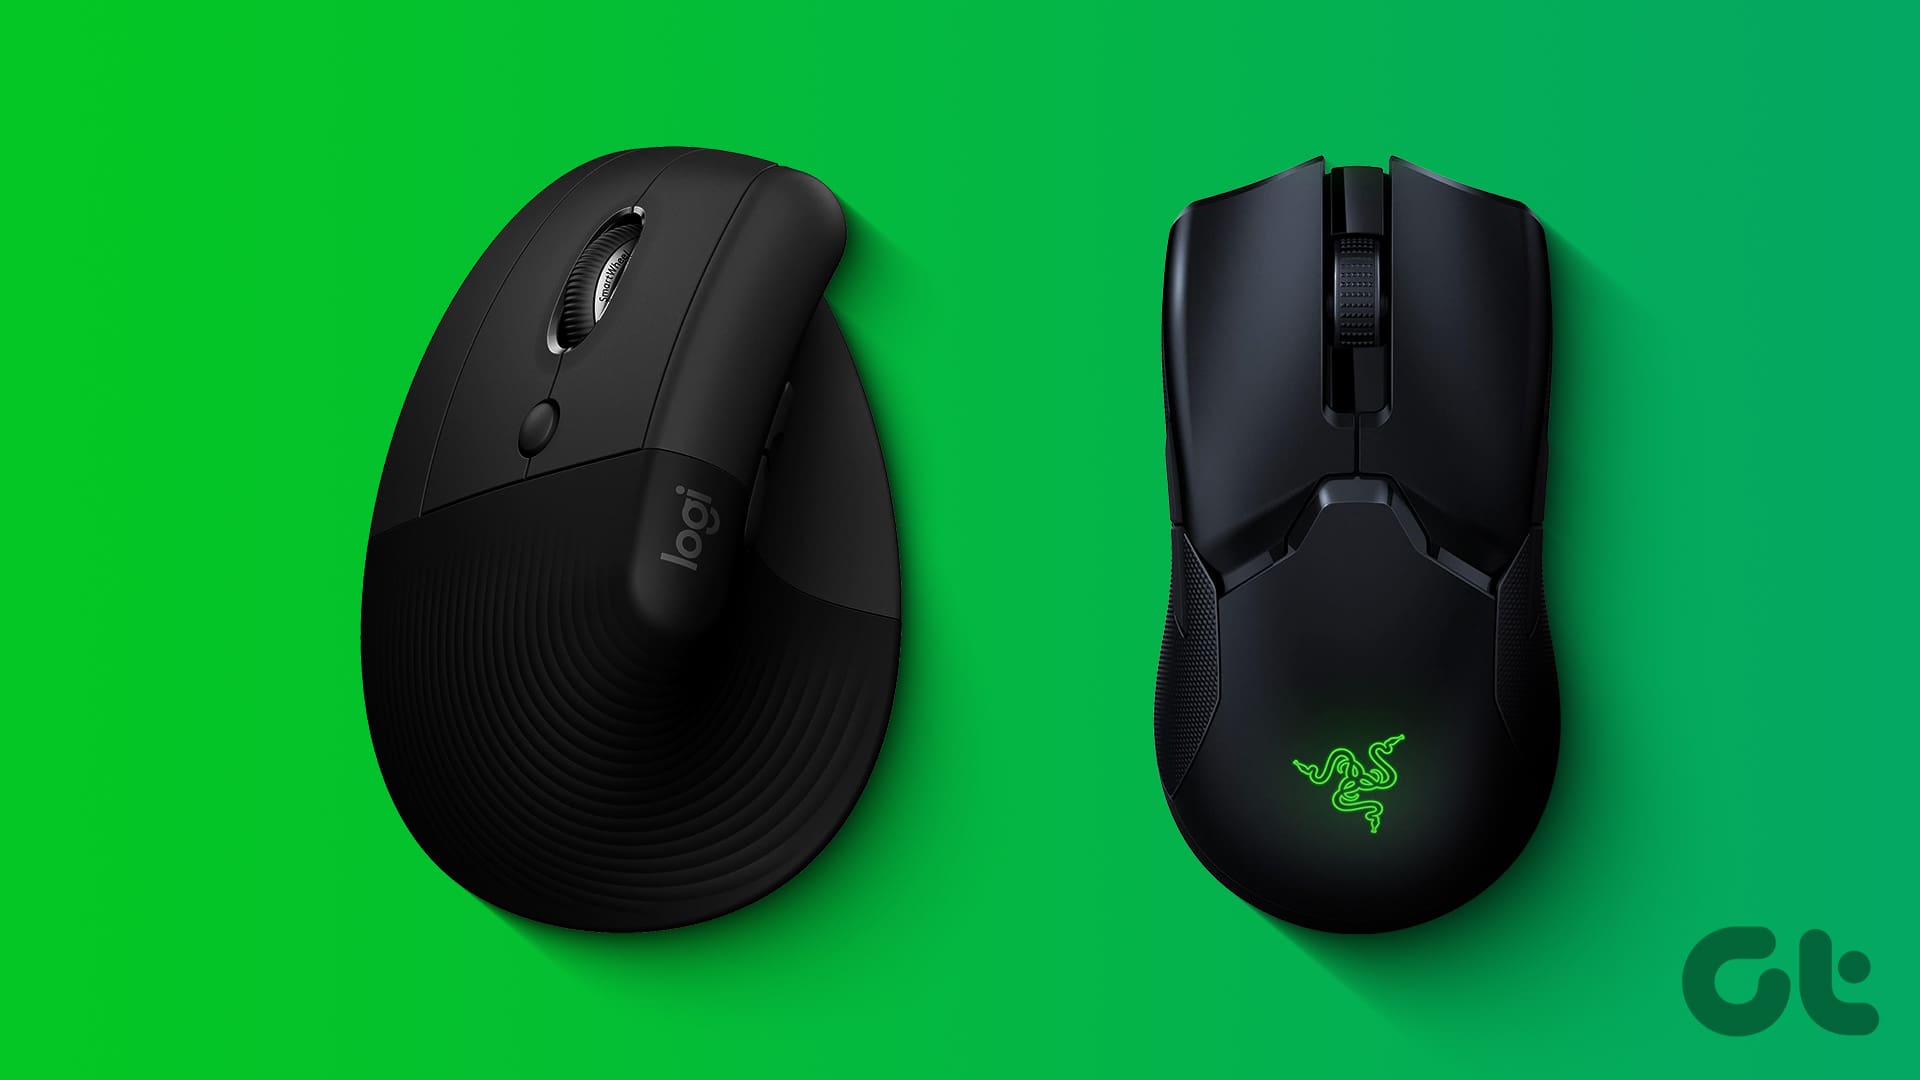 X_Best_Left Handed_Mouse_Gaming_and_Productivity